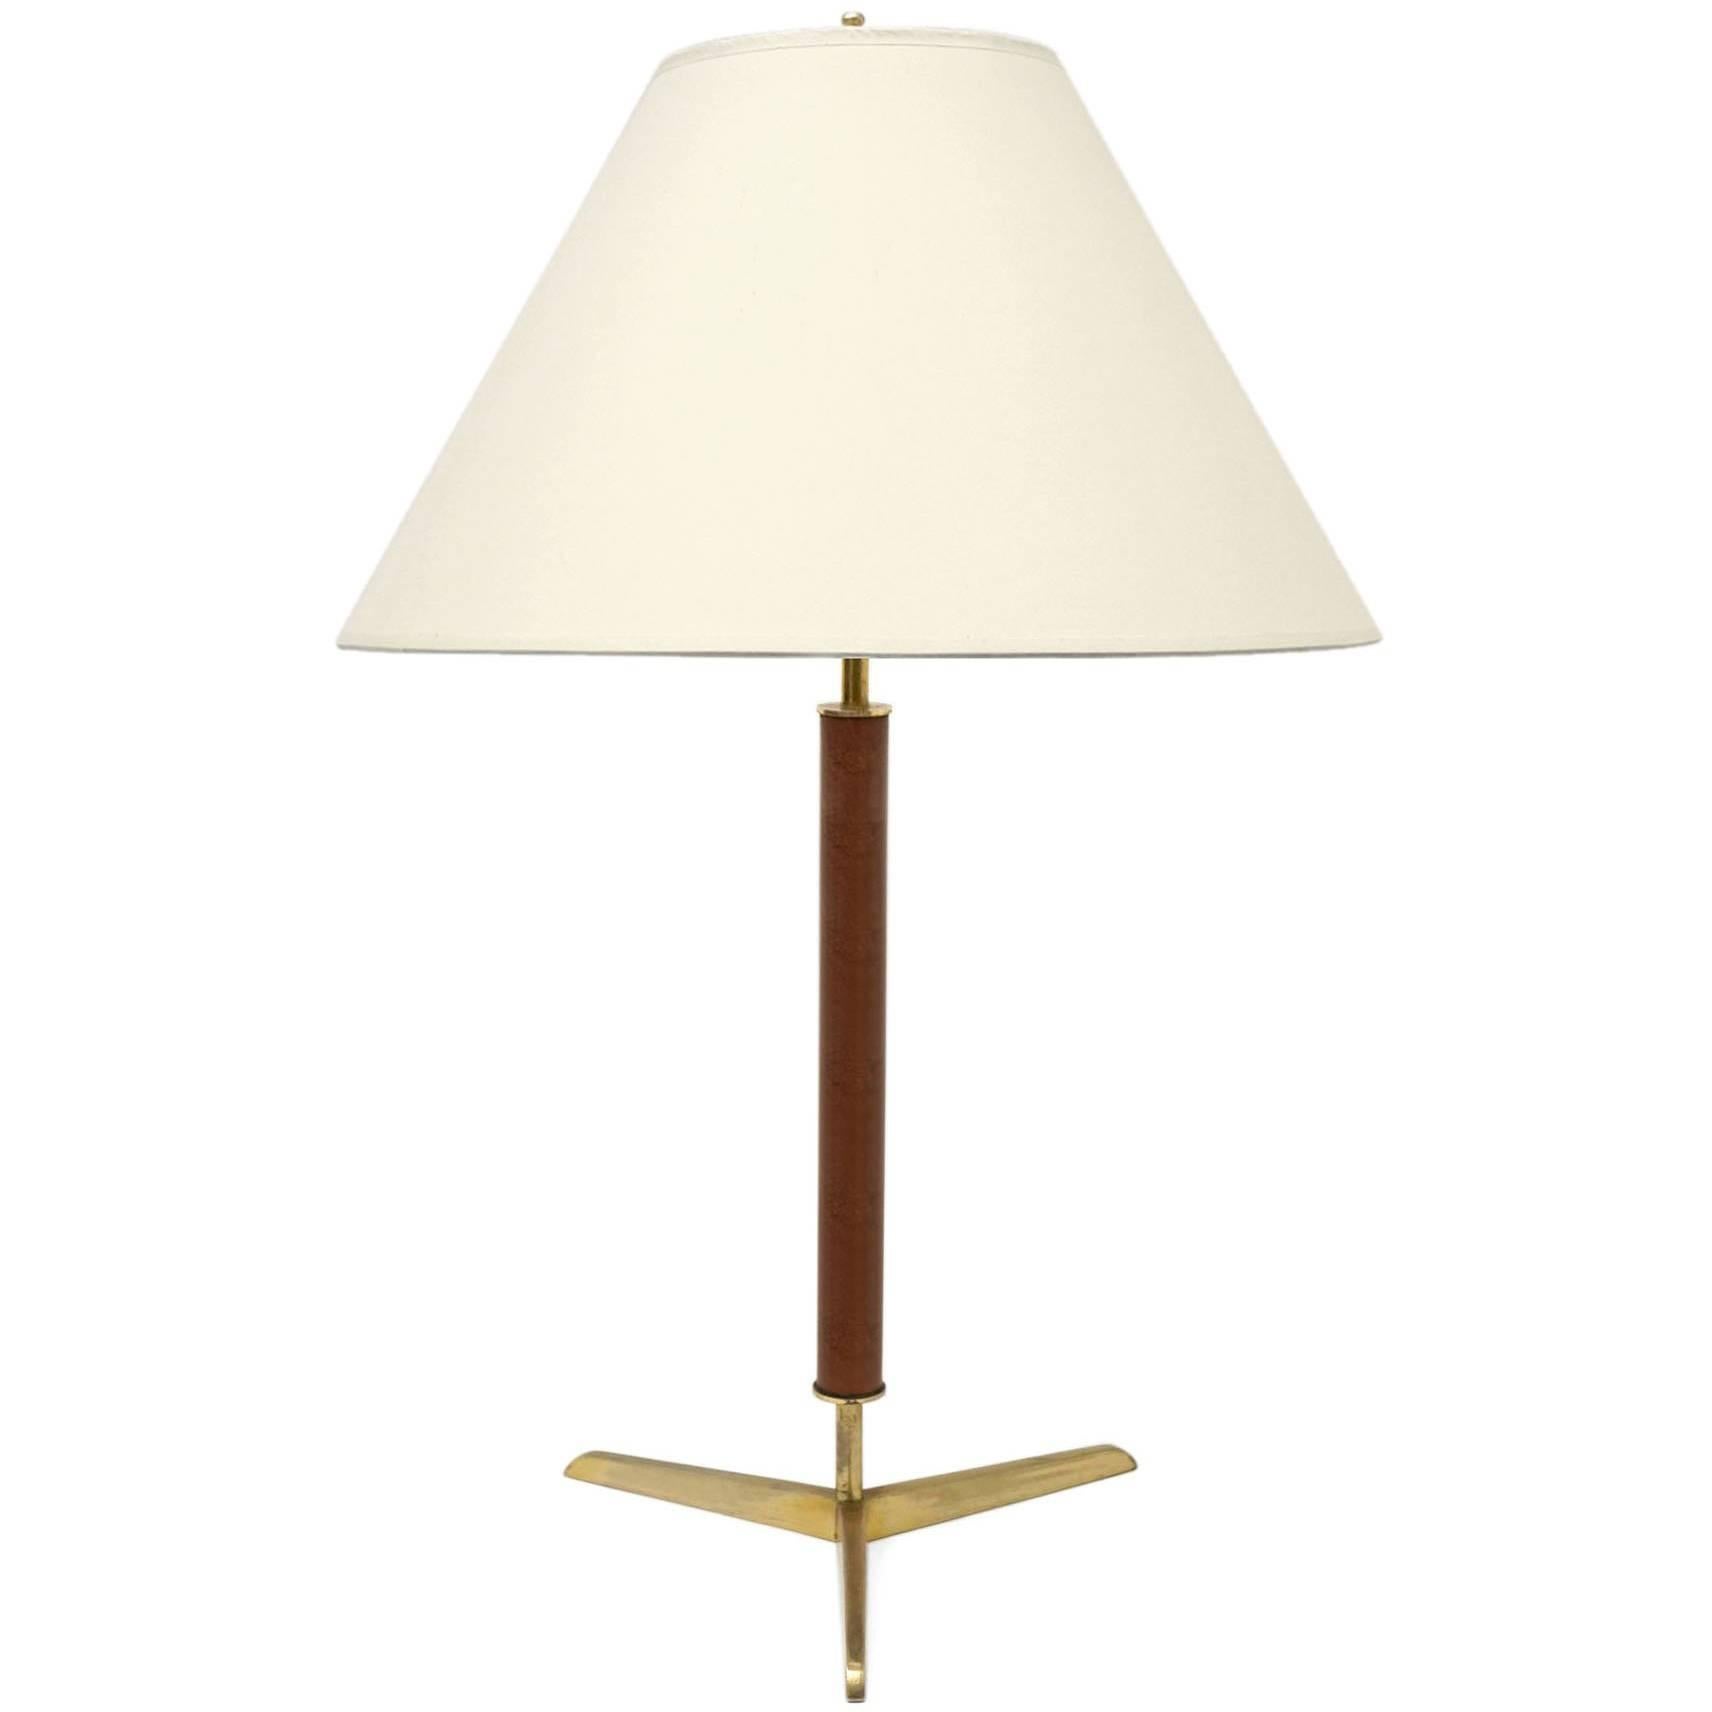 Brown Leather Clad and Brass Table Lamp on Tripod Brass Base, Spain, circa 1940s For Sale